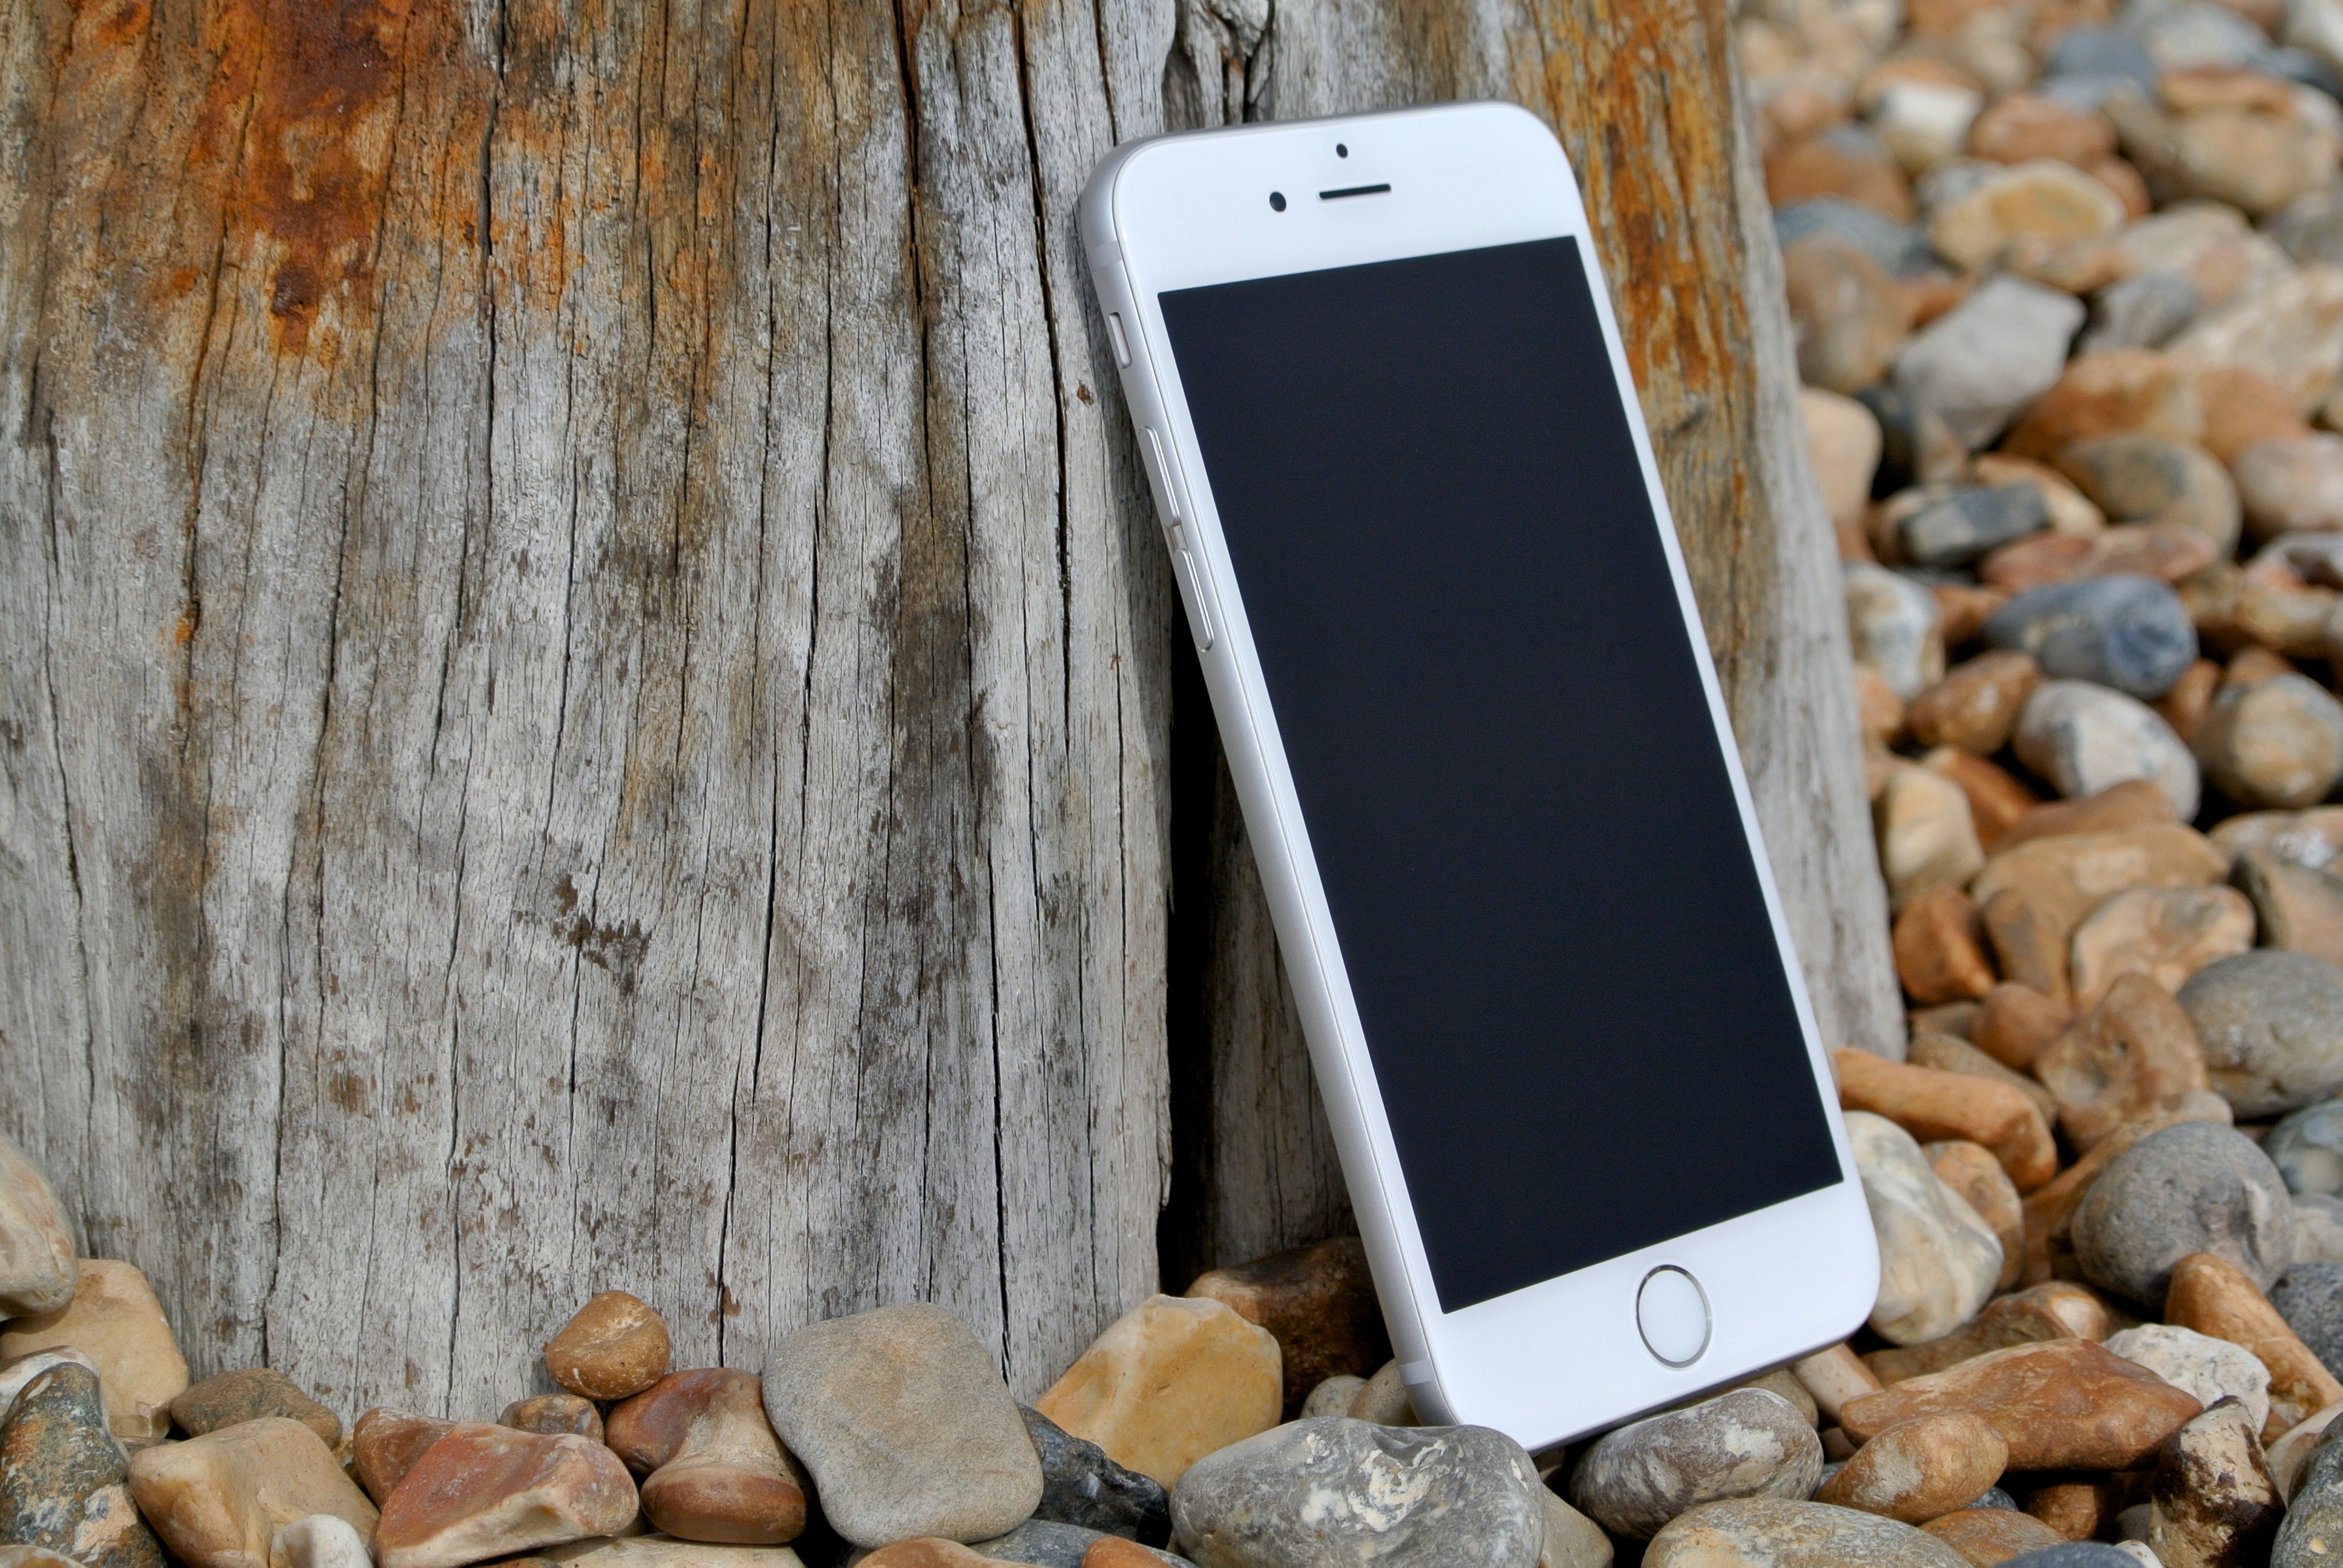 Silver iphone 6 on gray and brown stone photo